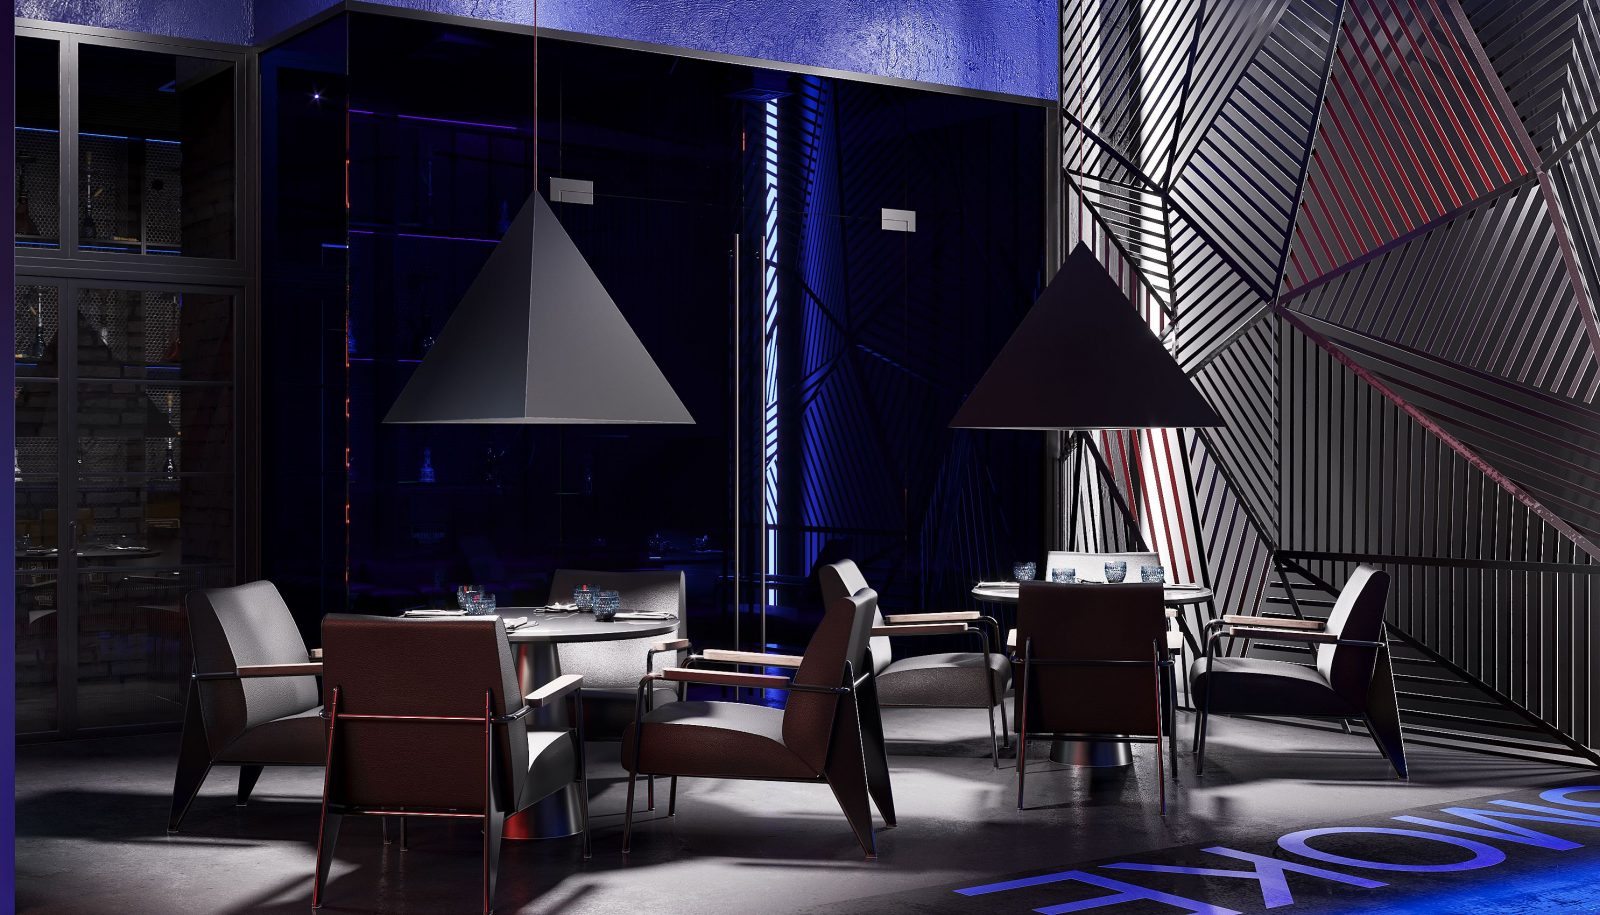 Lighting design. As an element of attracting visitors to a restaurant 6